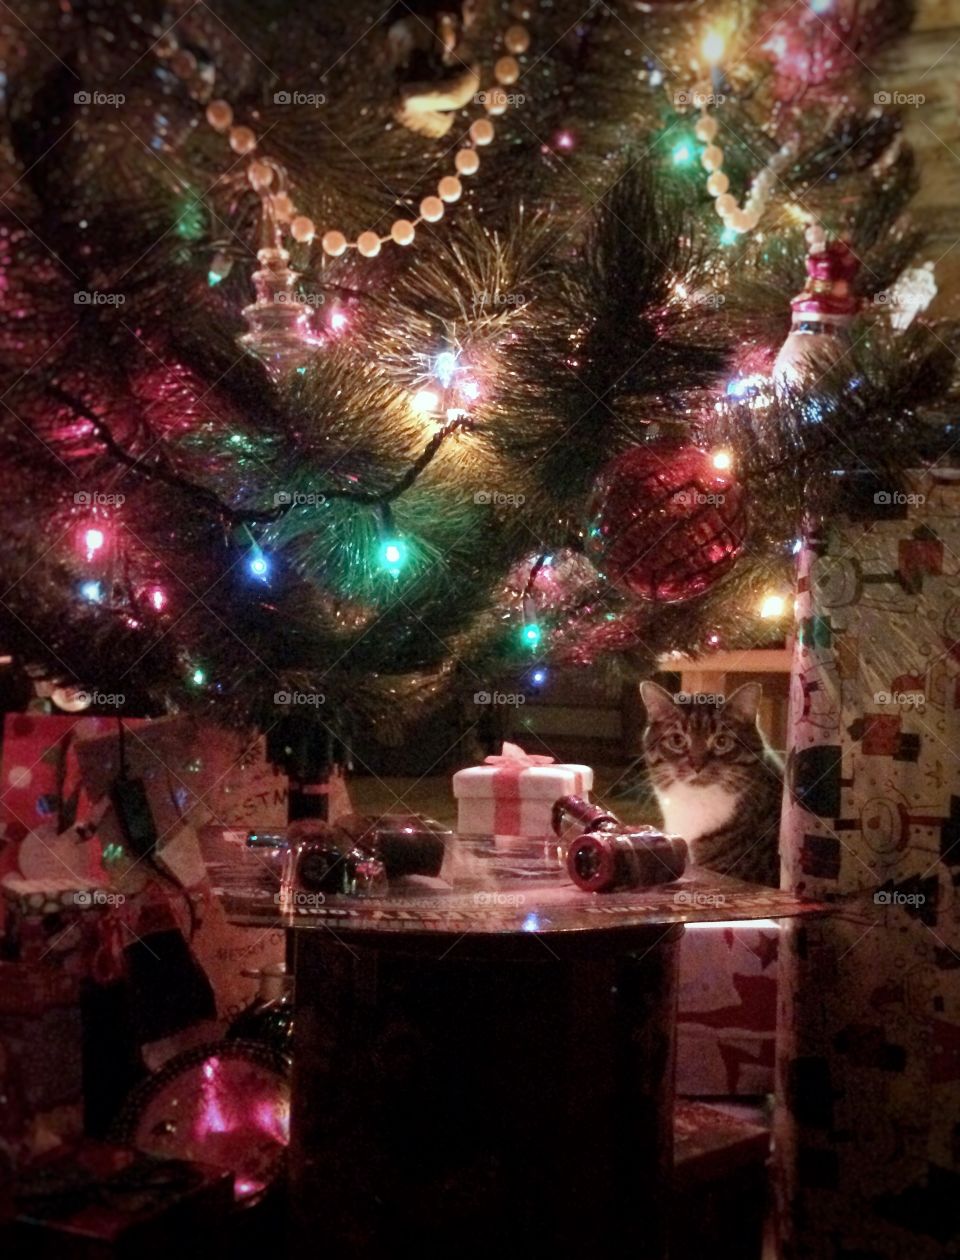 The beauty and magic of the Holidays is made even more special with the help of our beloved cat. 